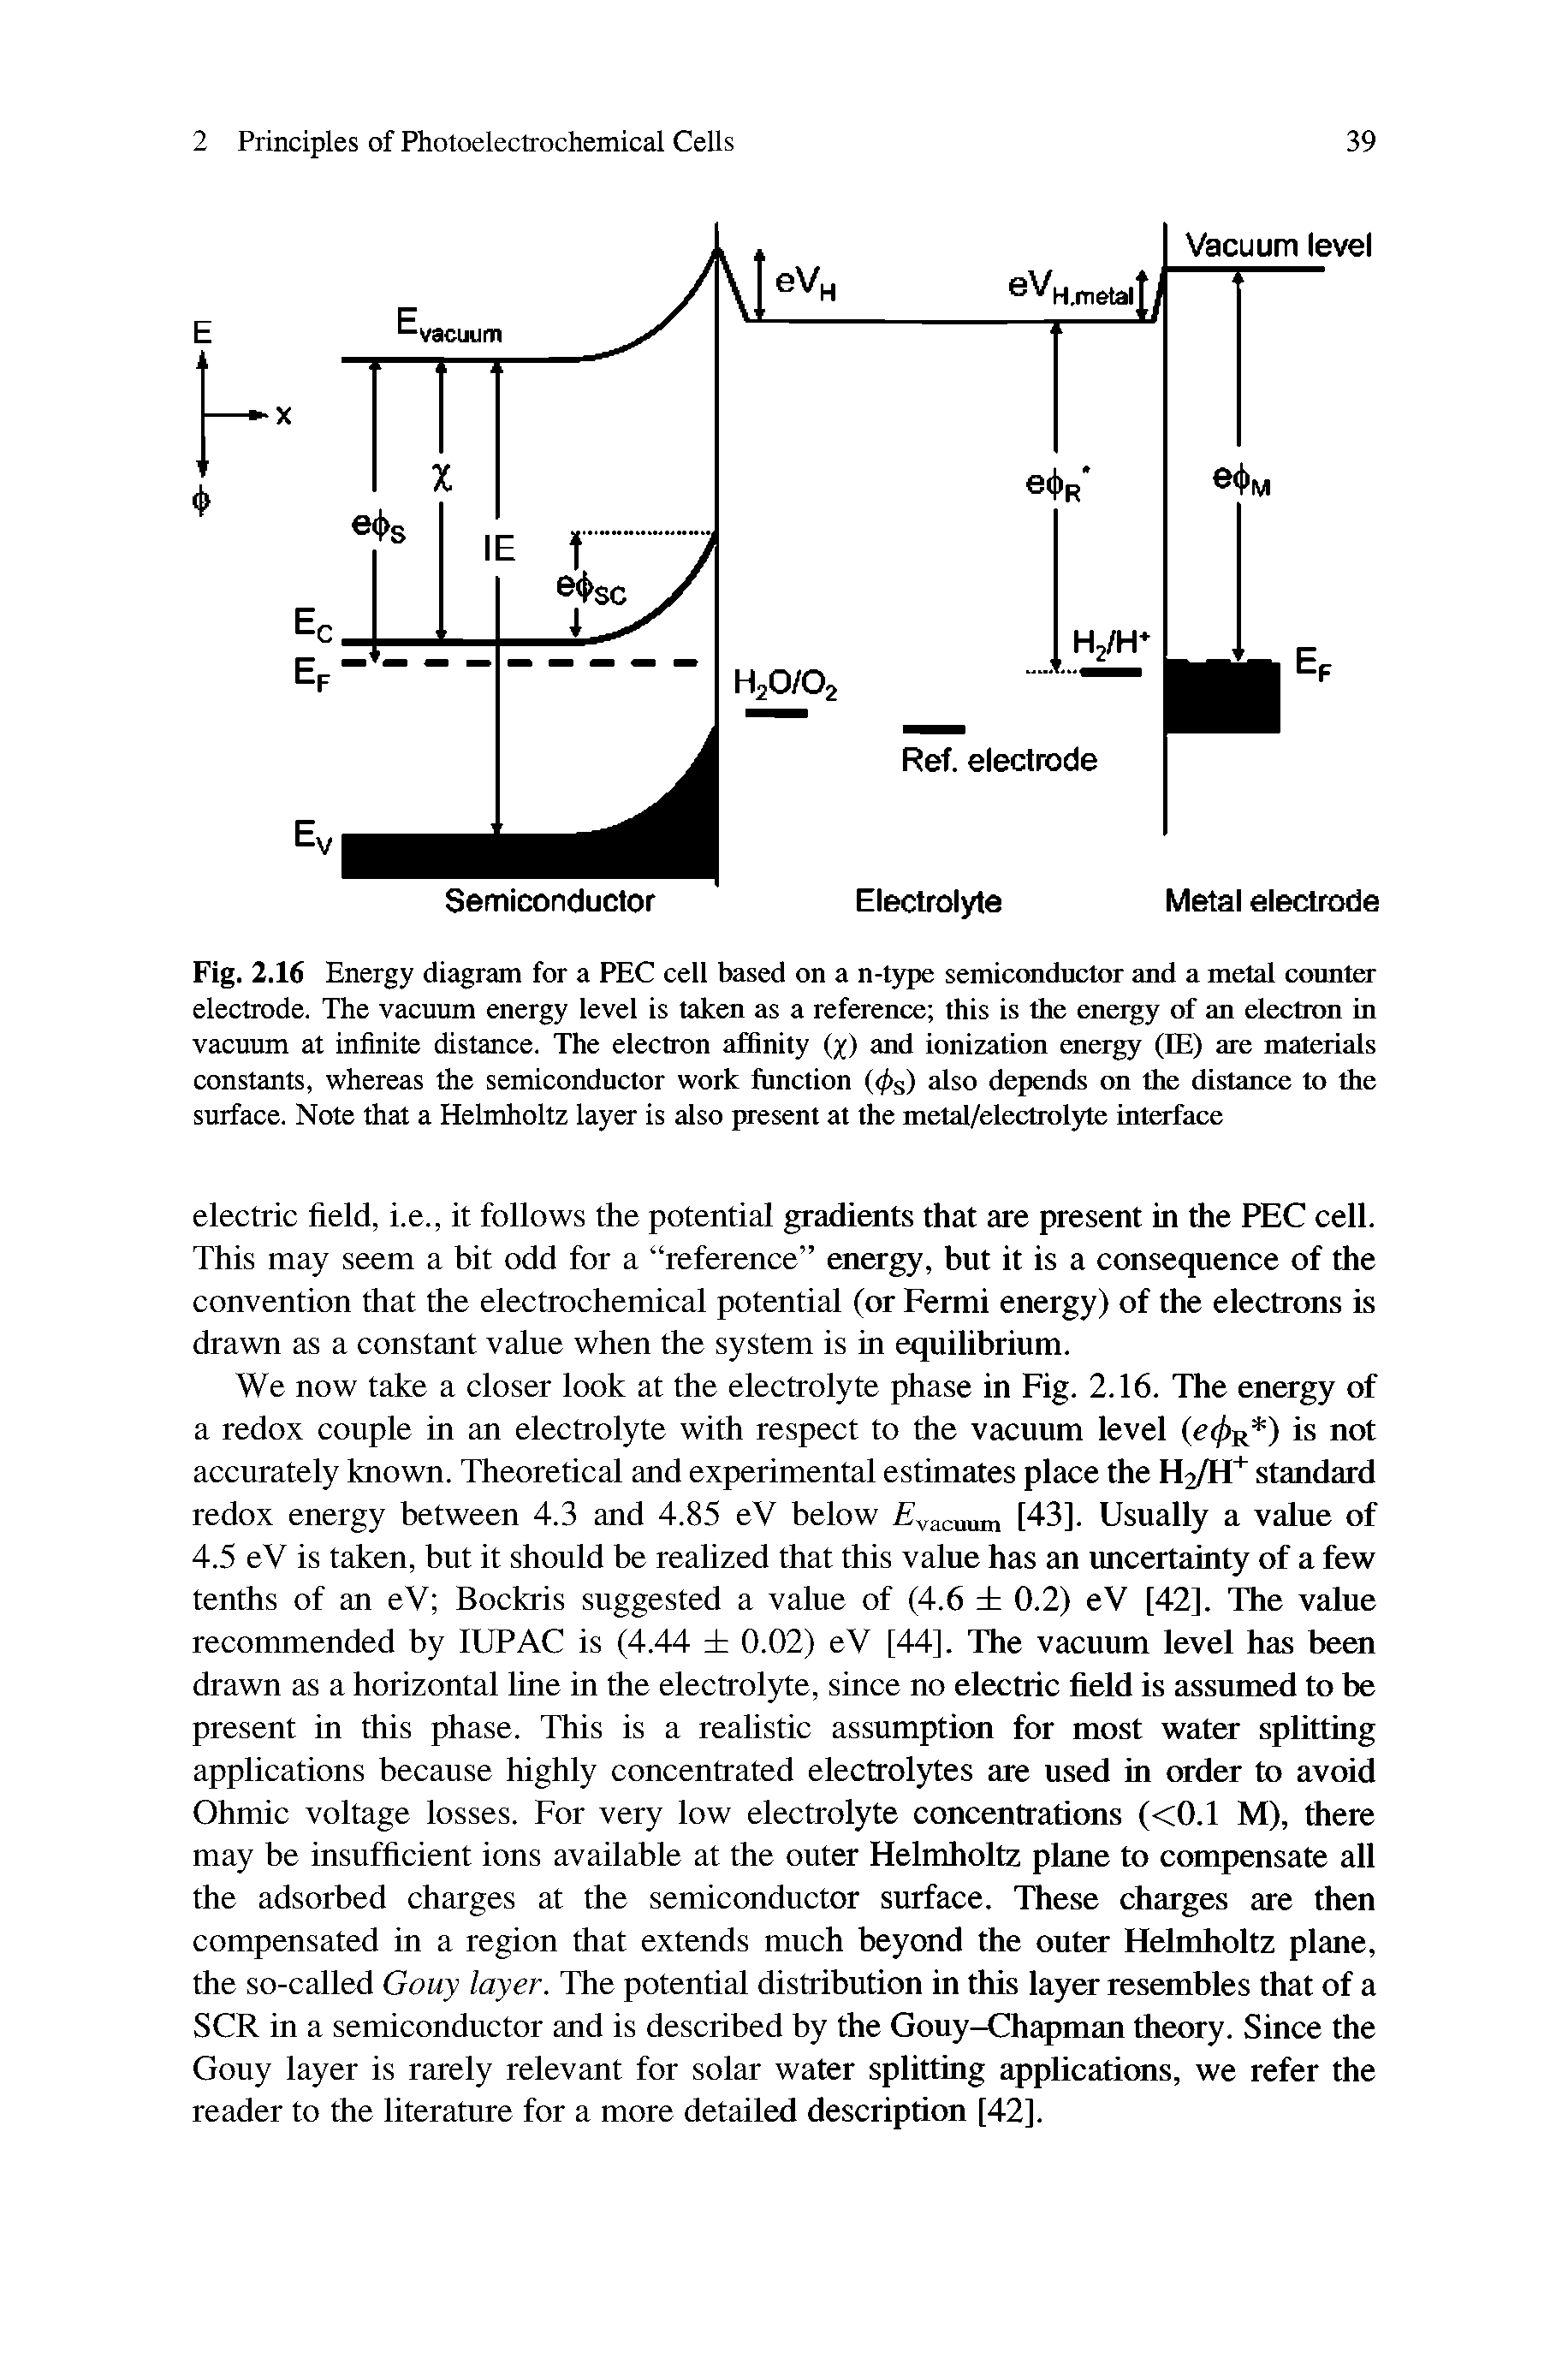 Fig. 2.16 Energy diagram for a PEC cell based on a n-type semicondnctor and a metal counter electrode. The vacuum energy level is taken as a reference this is the energy of an electron in vacuum at infinite distance. The electron affinity (y) and ionization oiergy (EE) are materials constants, whereas the semiconductor work function (< s) depends on the distance to the surface. Note that a Helmholtz layer is also present at the metal/electrolyte interface...